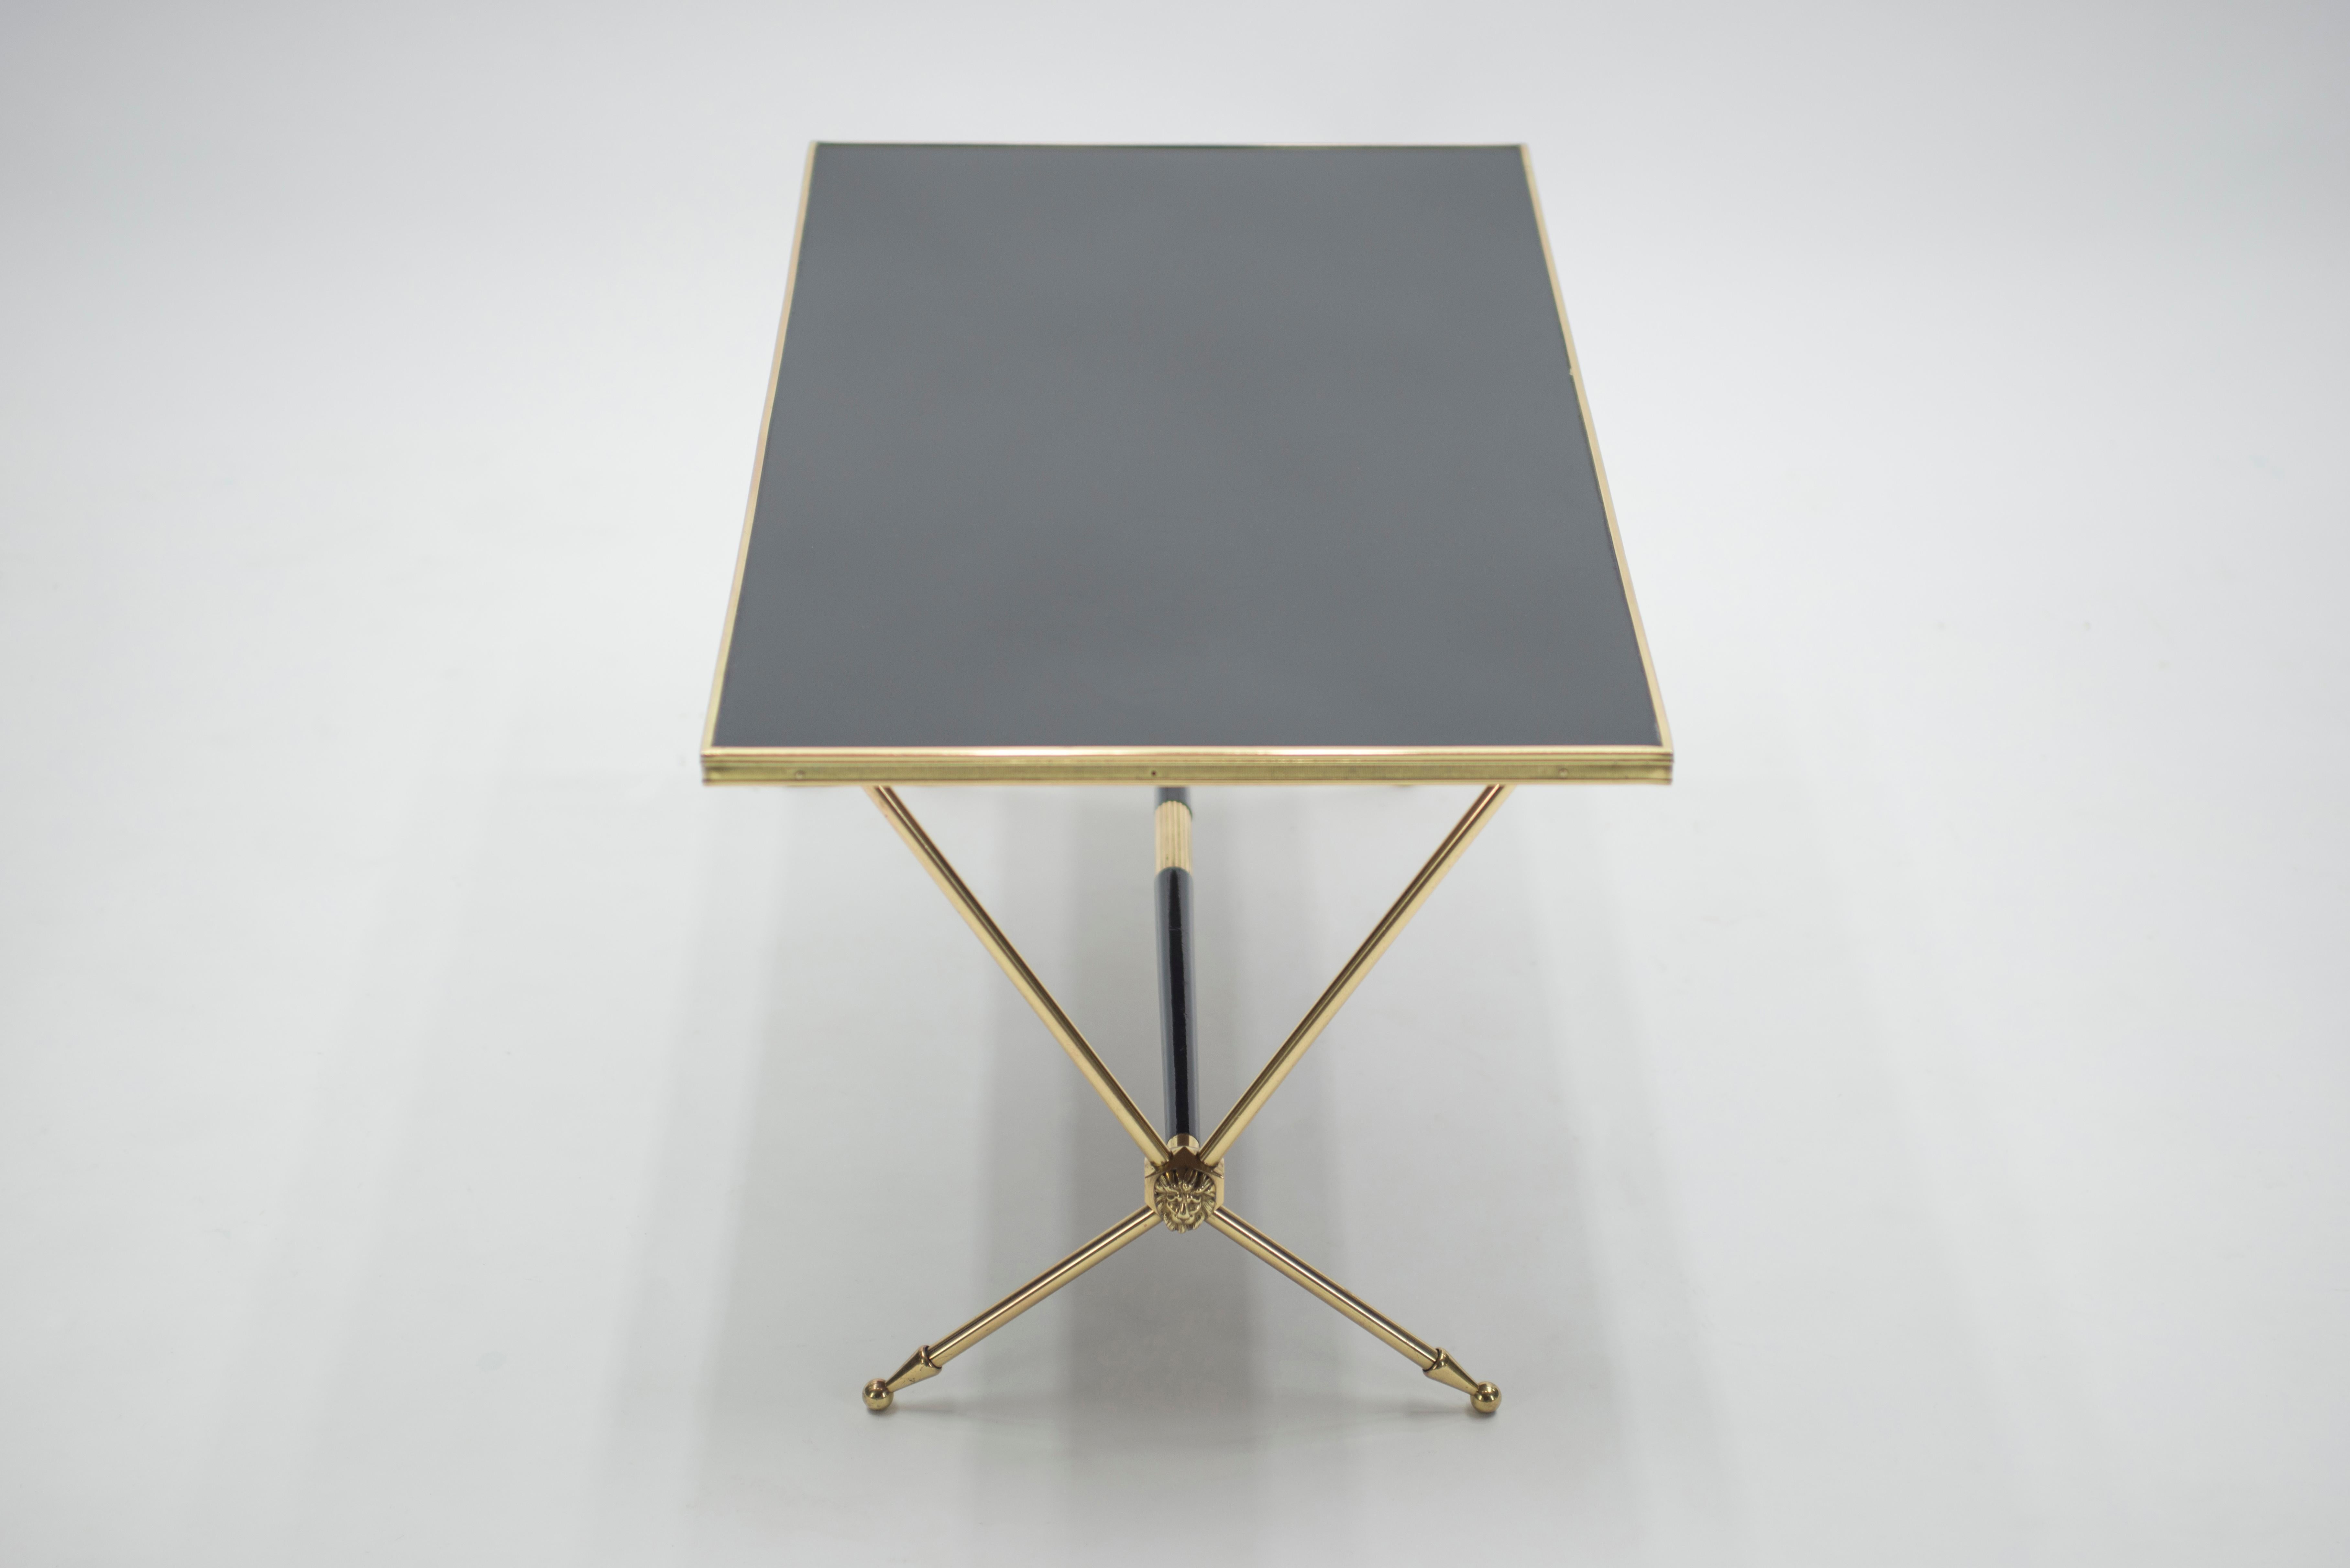 French Neoclassical Raphael Brass and Opaline Coffee Table, 1960s For Sale 6